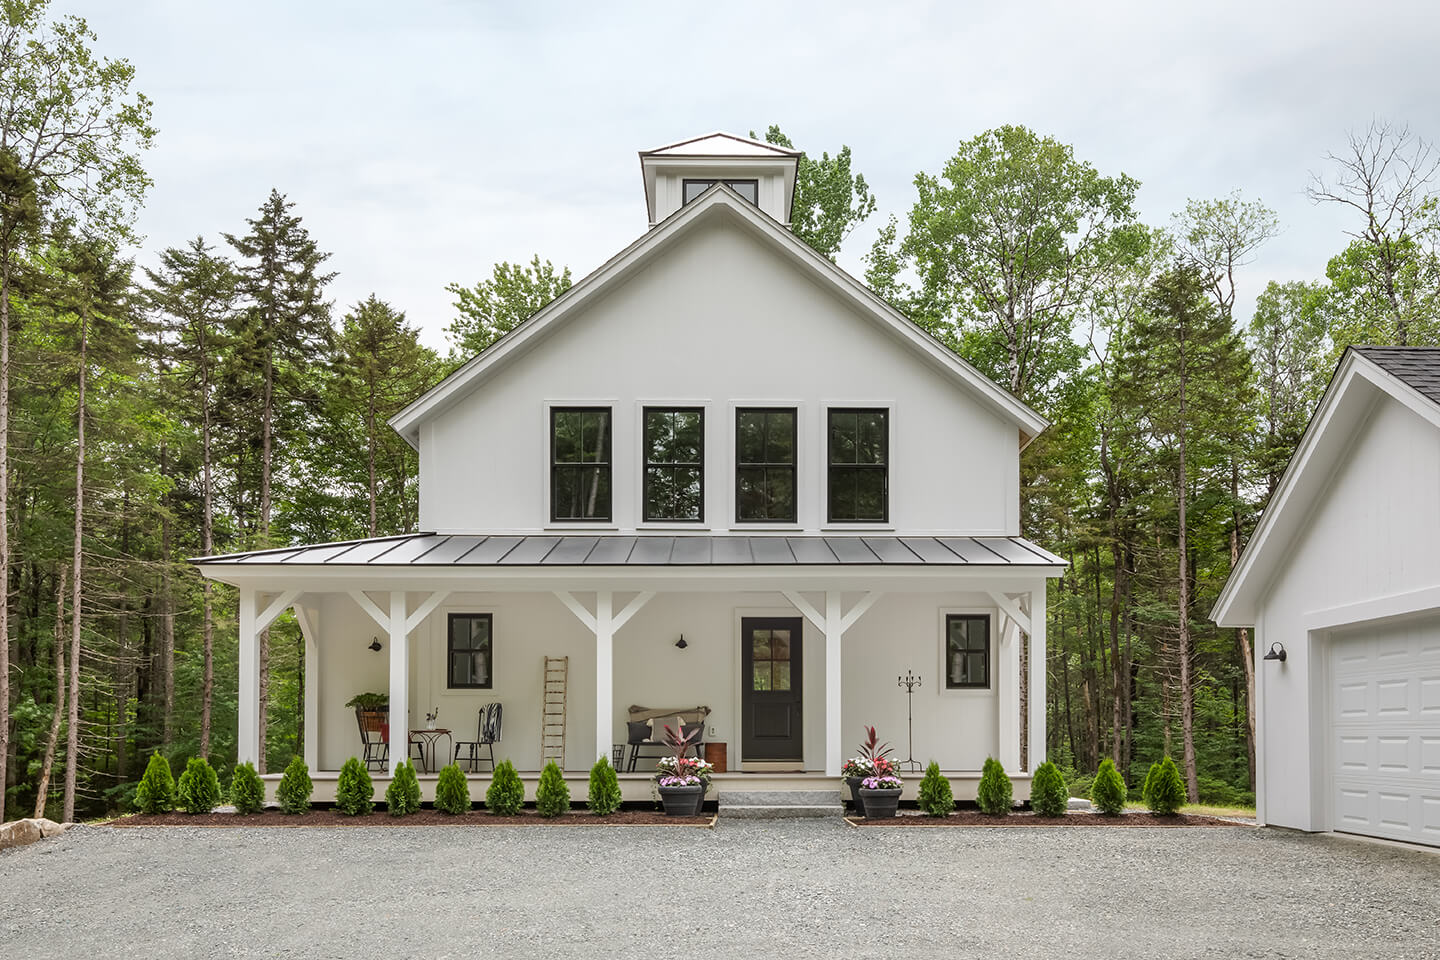 Exterior of Cottage farmhouse-style home in New Hampshire.